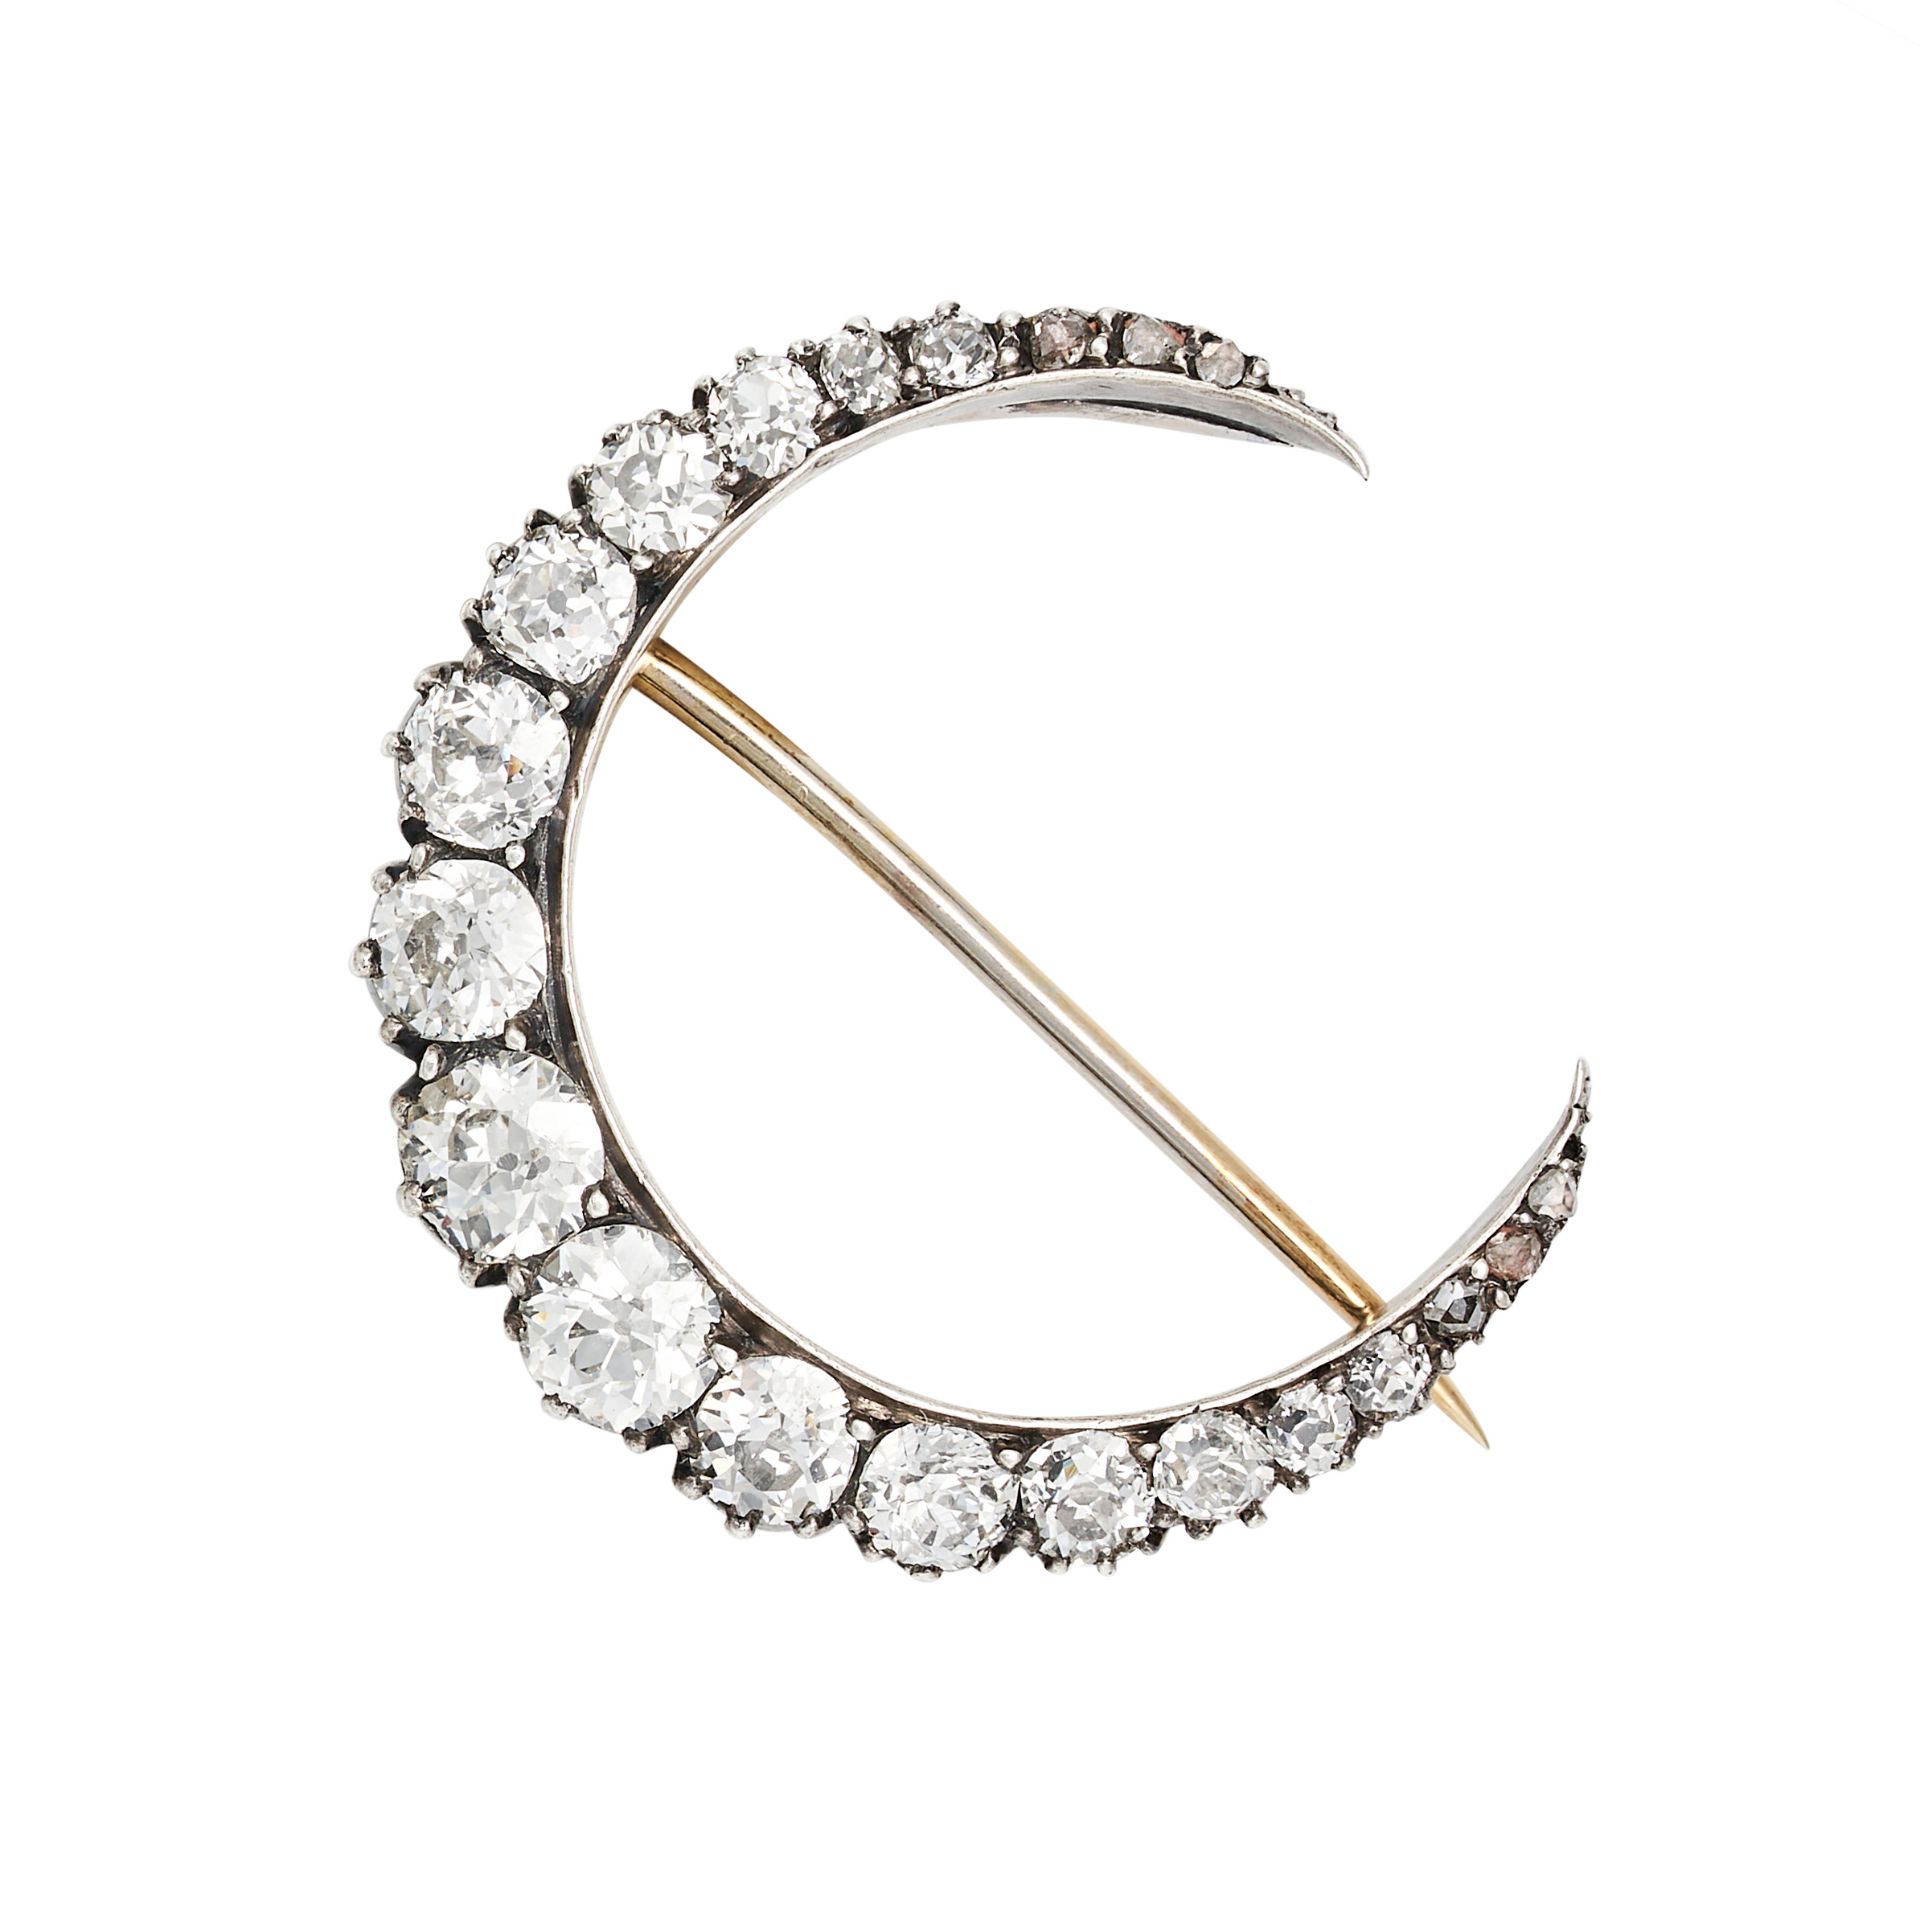 AN ANTIQUE VICTORIAN DIAMOND CRESCENT MOON BROOCH in yellow gold and silver, designed as a cresce...